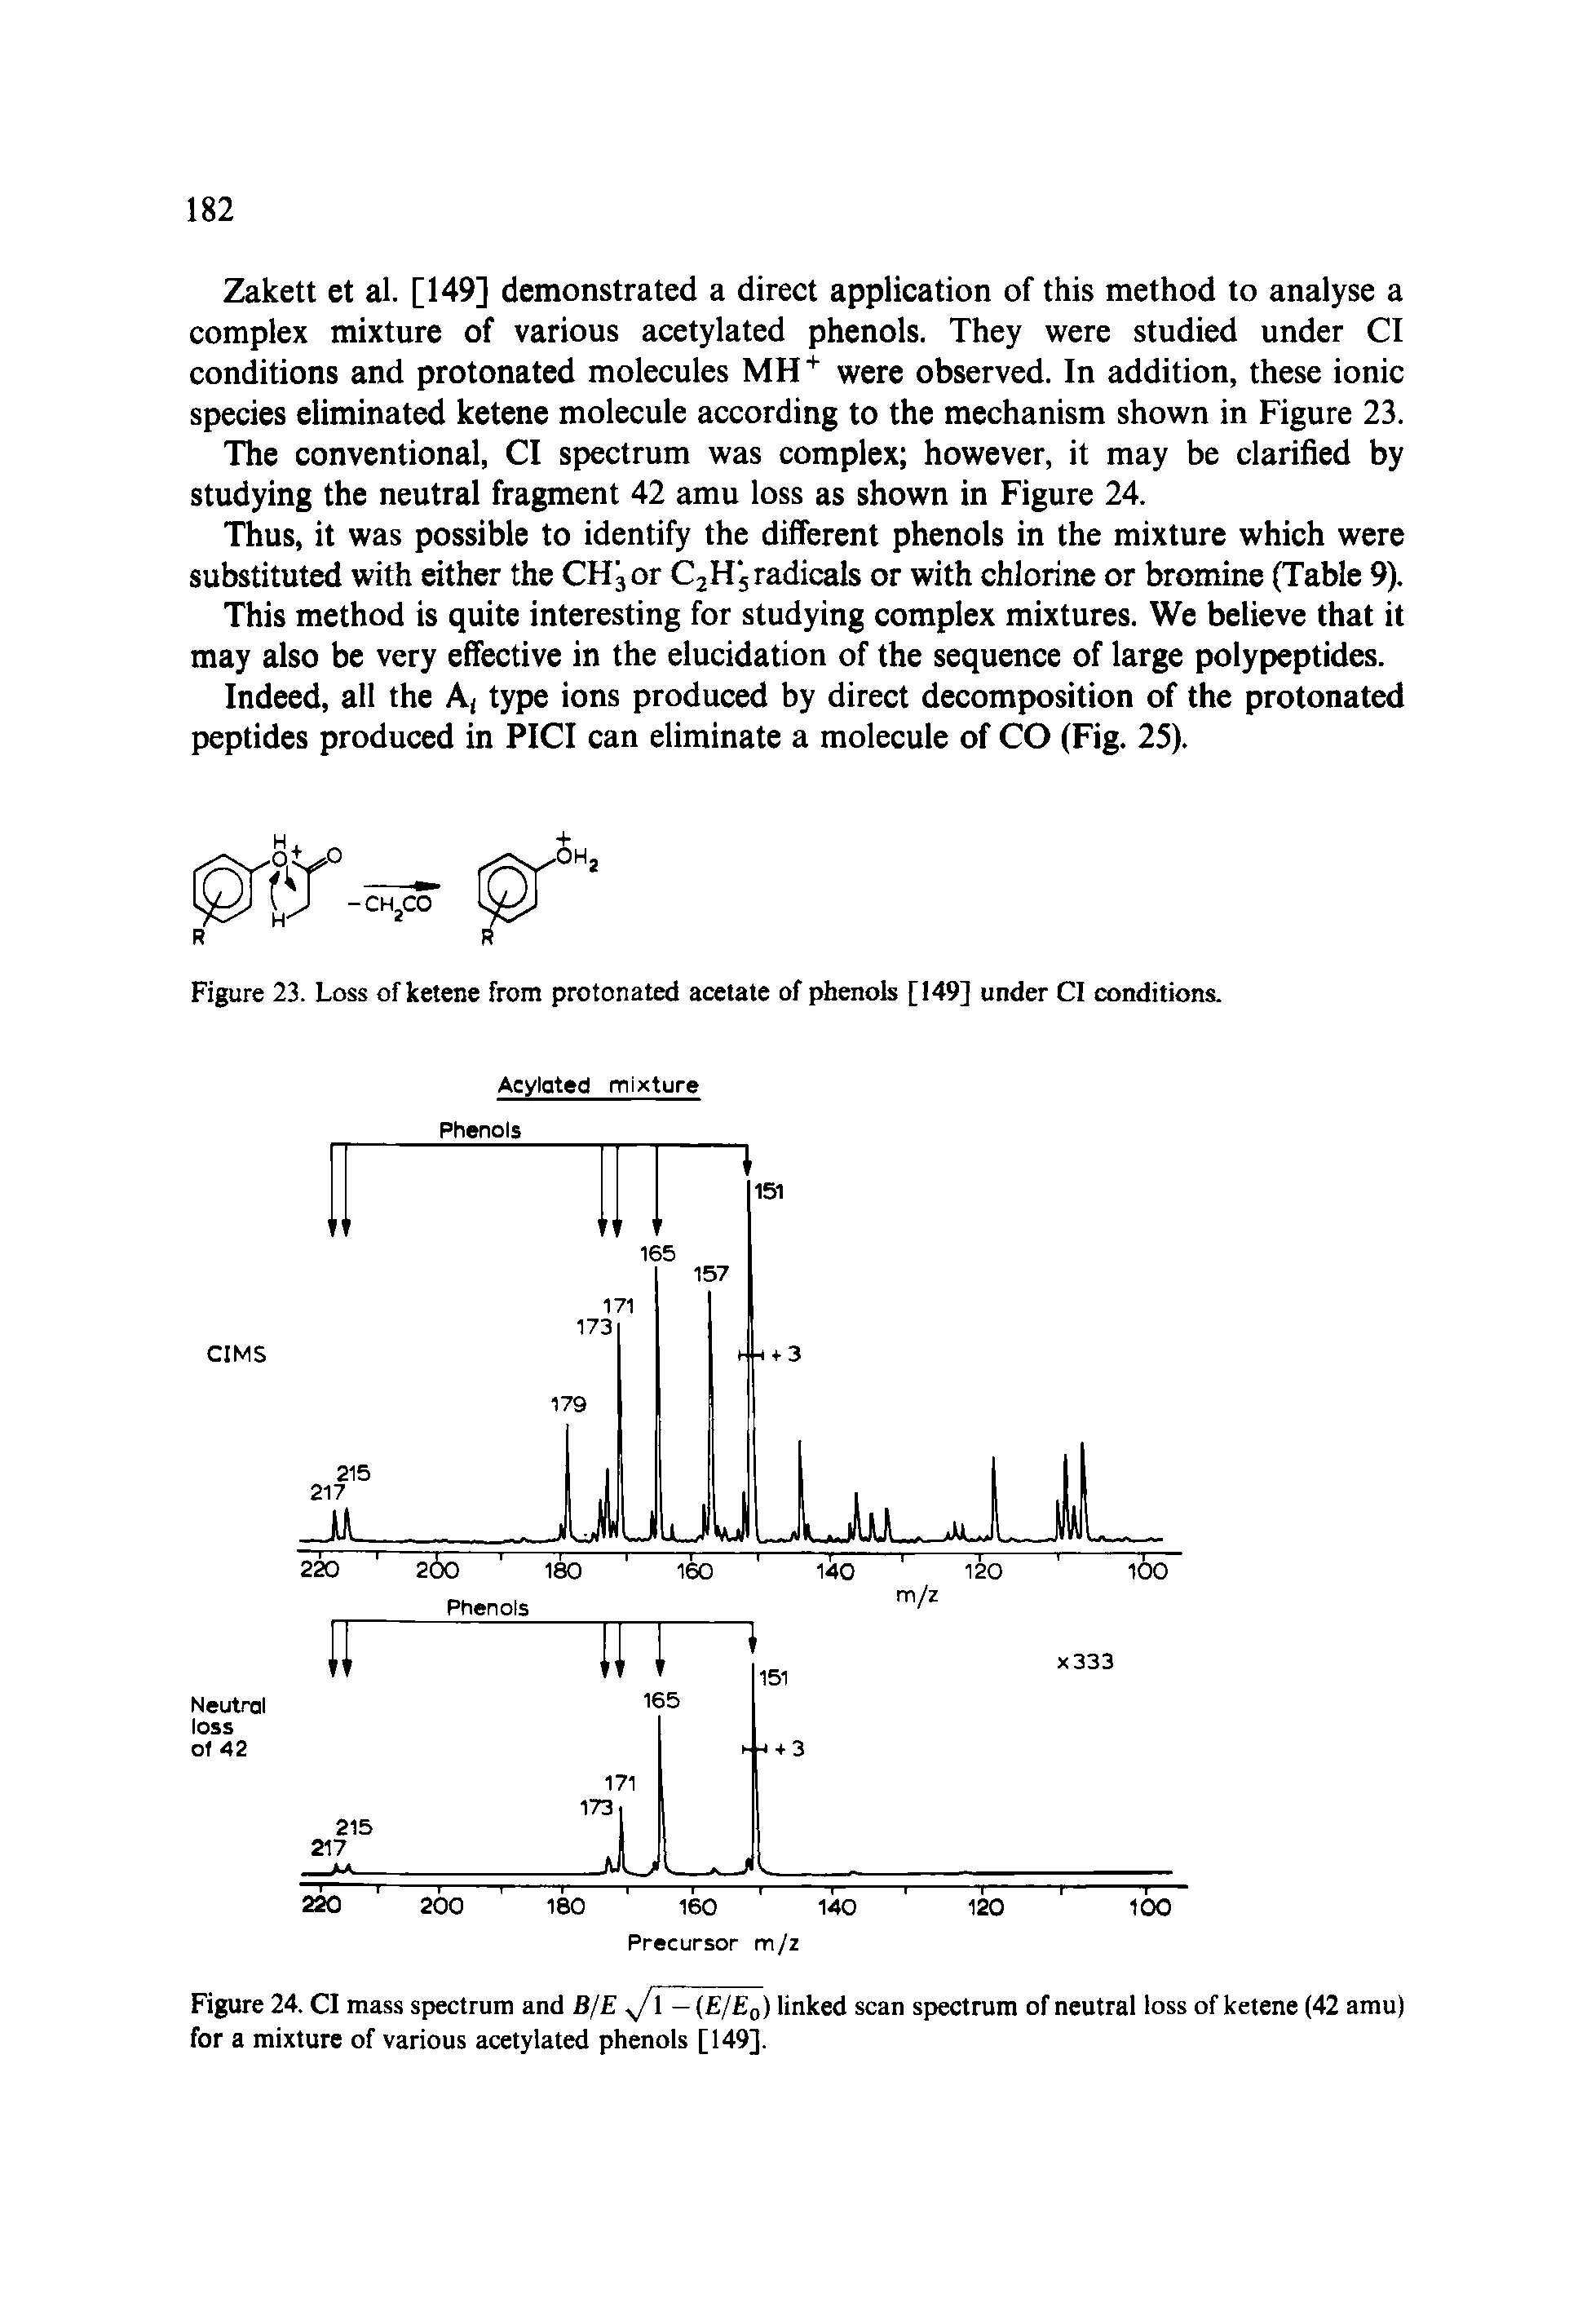 Figure 24. Cl mass spectrum and BjE — E/Eo) linked scan spectrum of neutral loss of ketene (42 amu) for a mixture of various acetylated phenols [149].